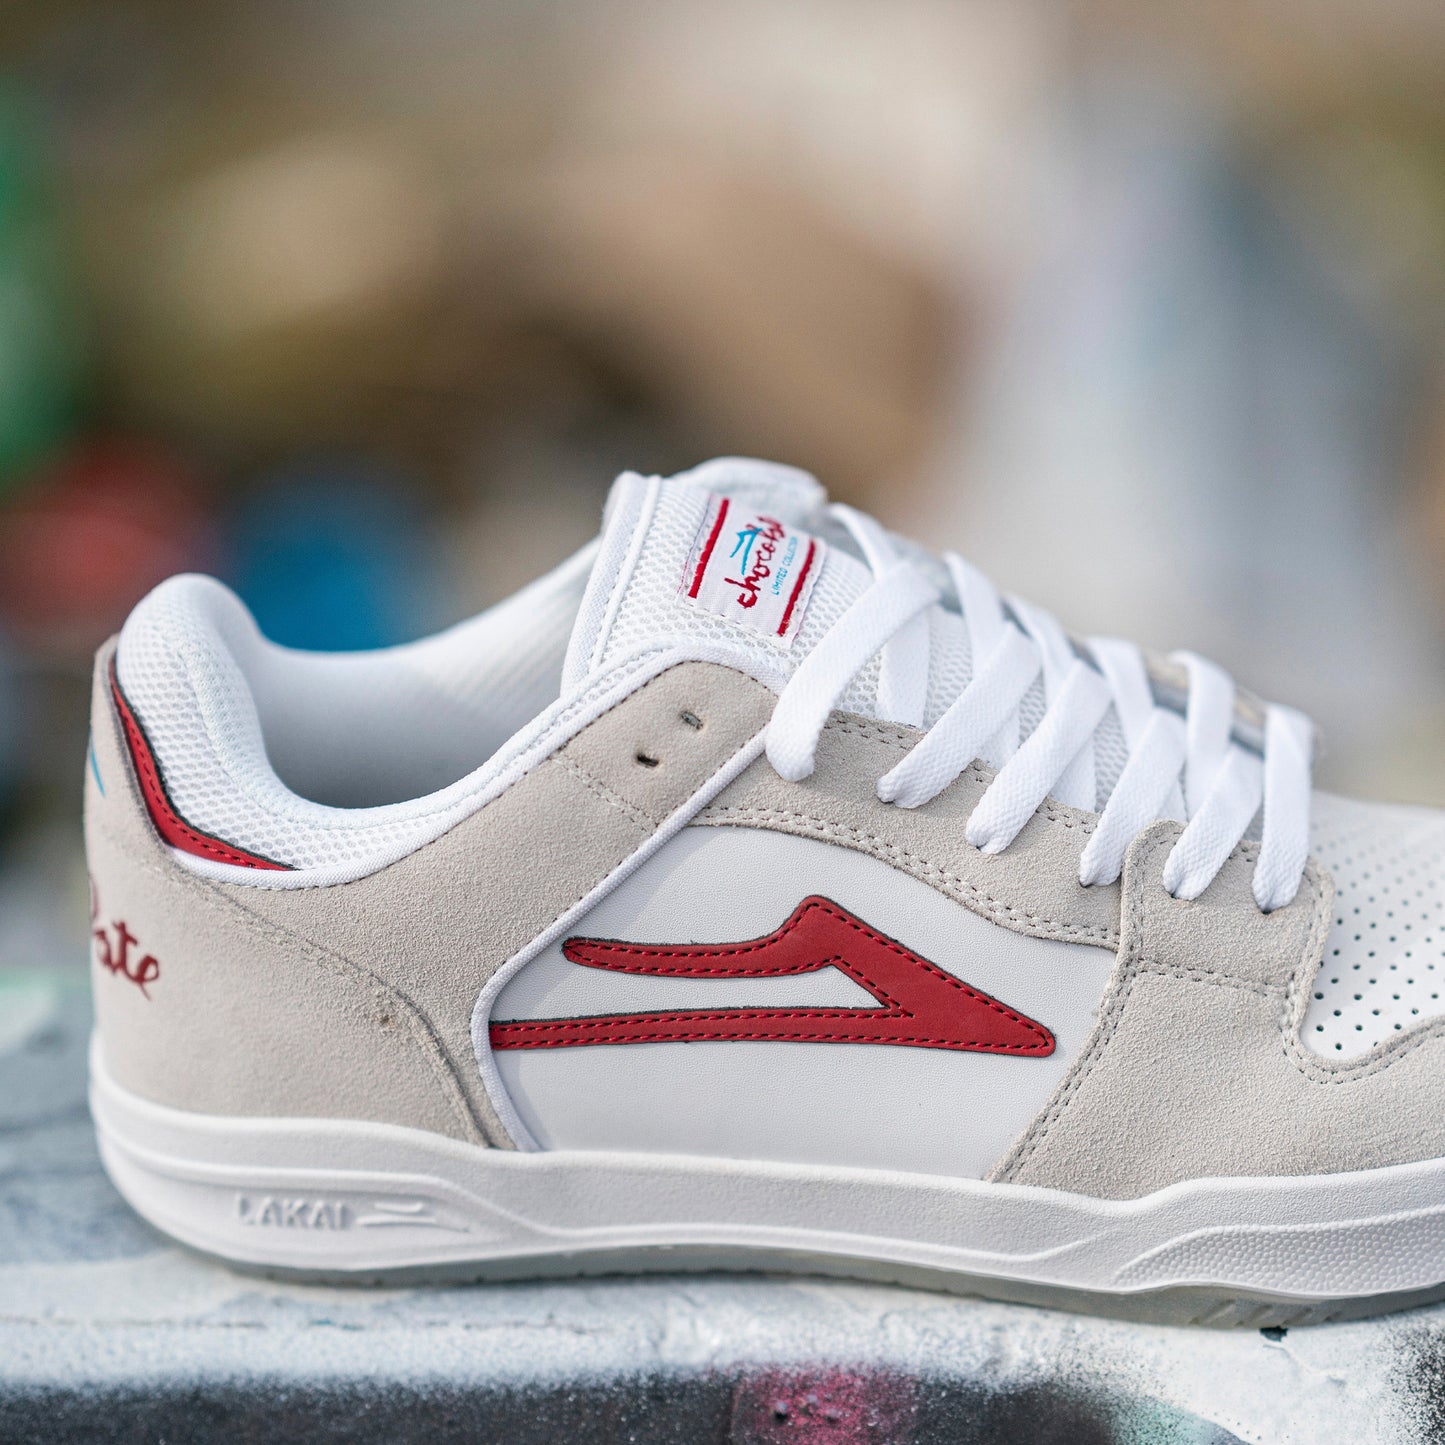 Lakai x Chocolate - Telford Low Shoes - White/ Red - Prime Delux Store